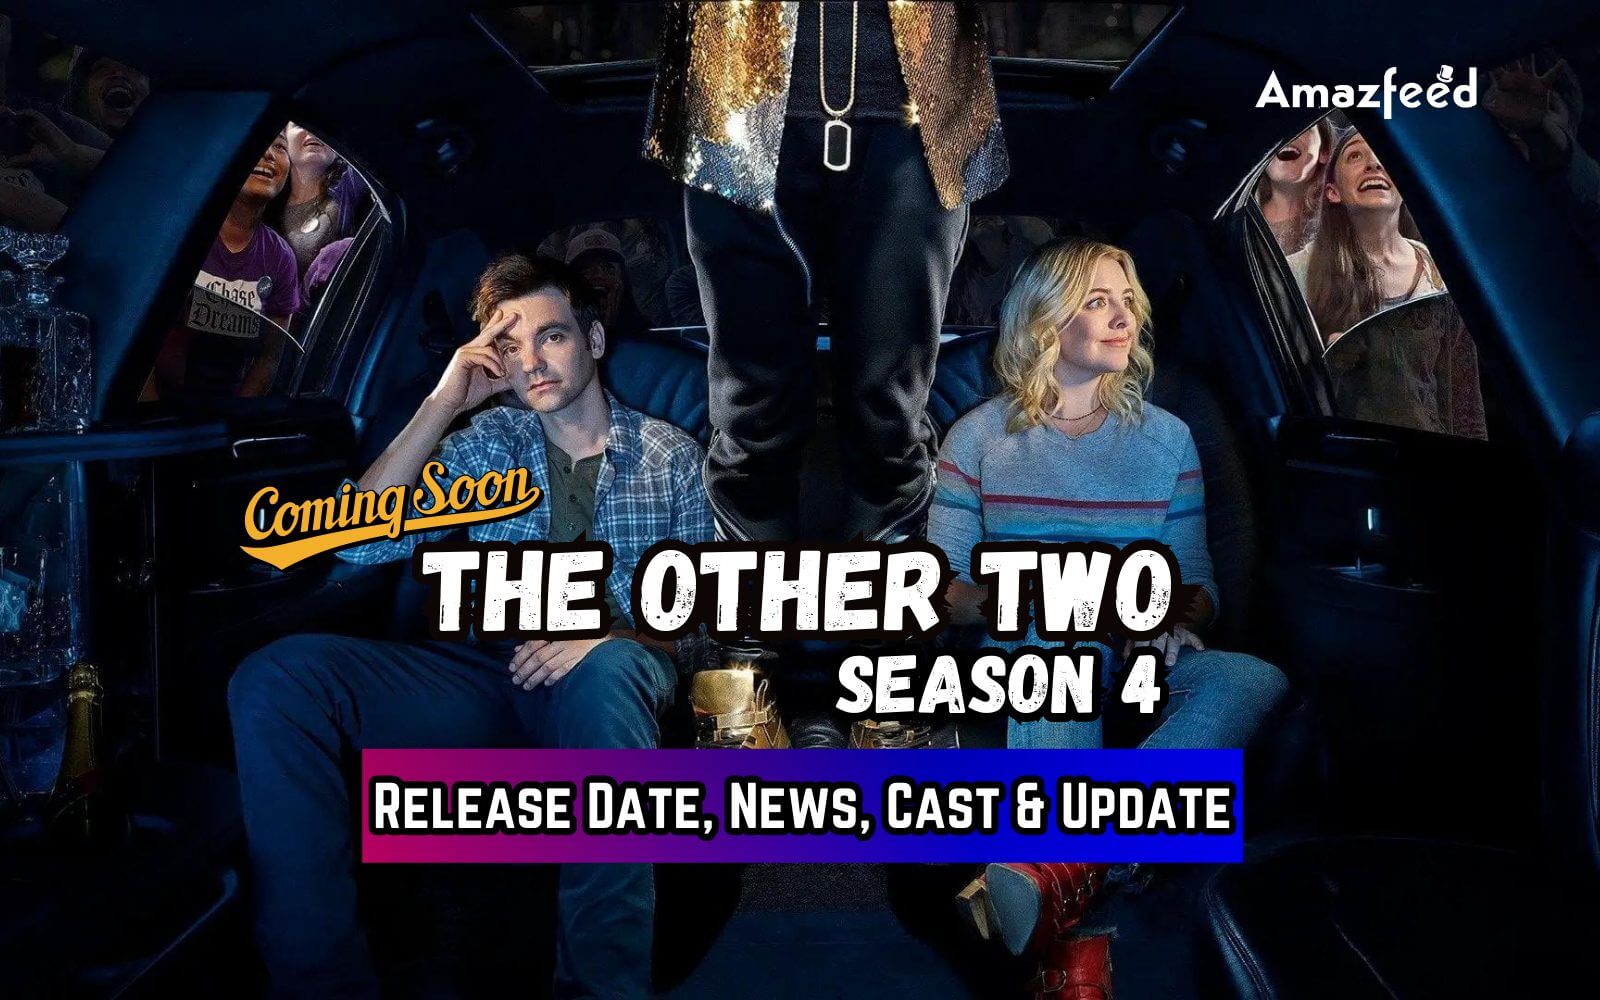 The Other Two Season 4 ⇒ Release Date, News, Cast, Spoilers & Updates ...